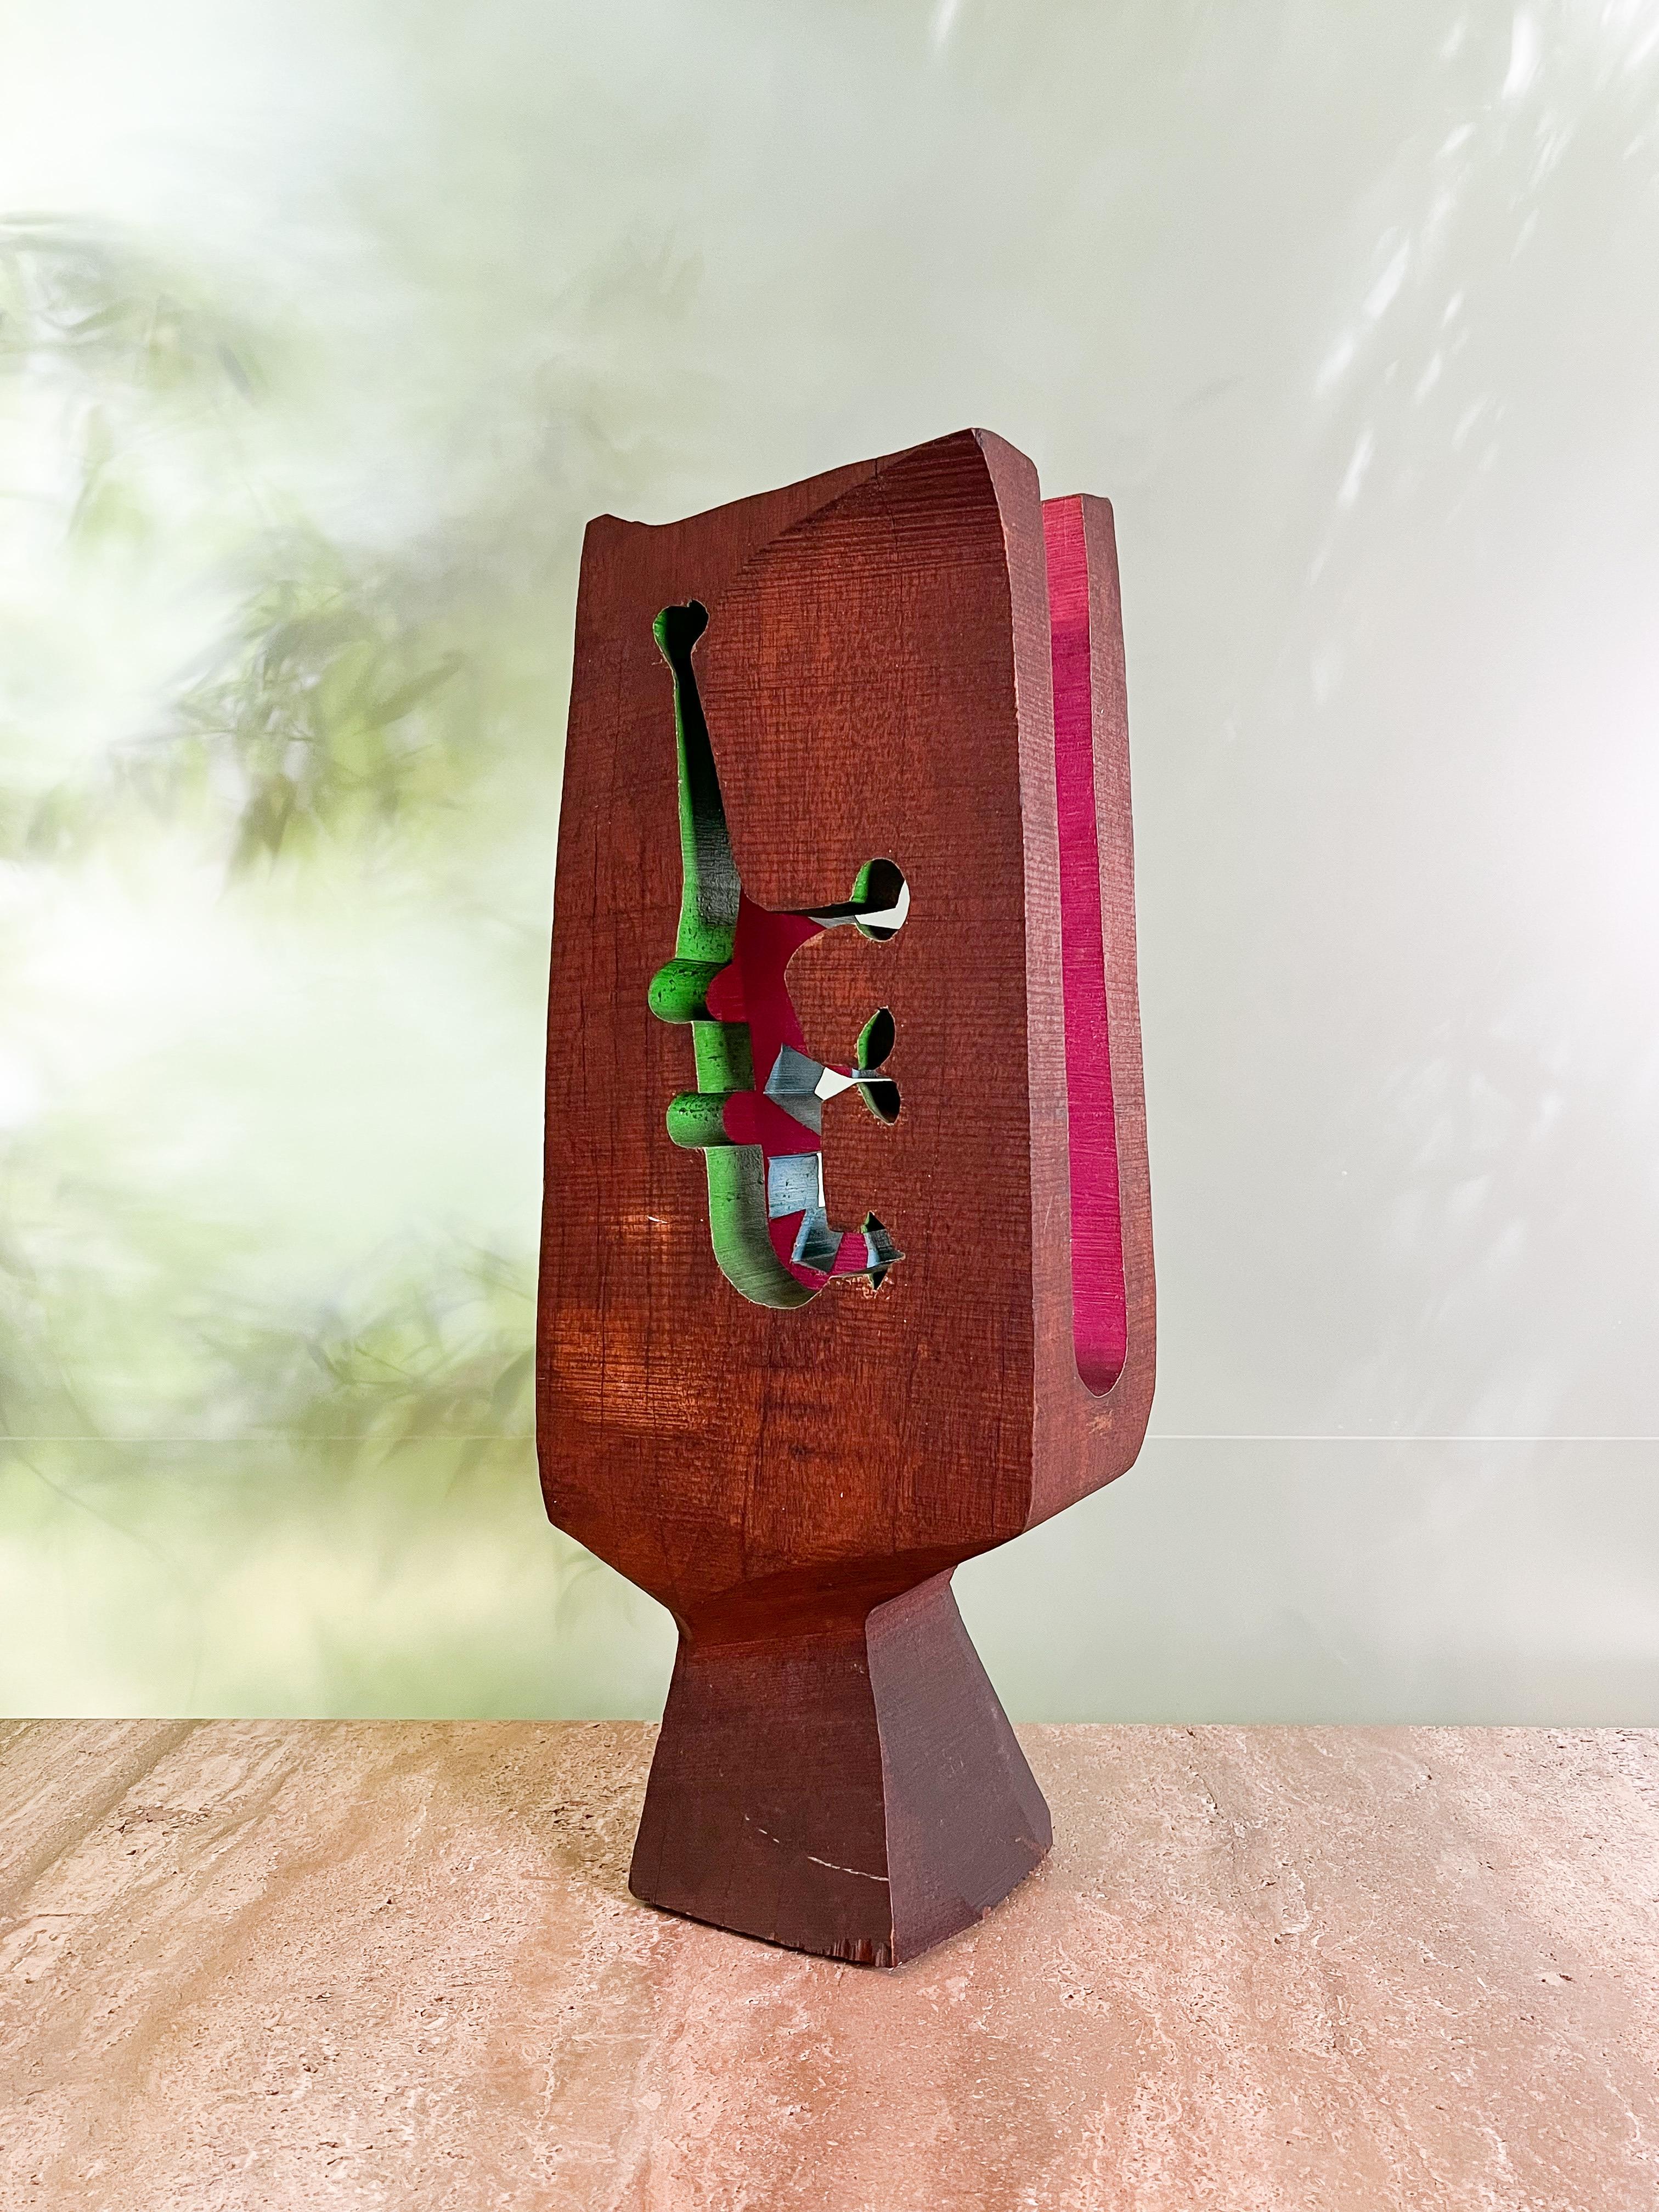 Stained and polychromed, this sawn oak sculpture by American artist Hugh Townley (1923-2008) dates from 1957. Contrasting splashes of color flash through the cutout abstract forms for which the artist is known. Stamped 